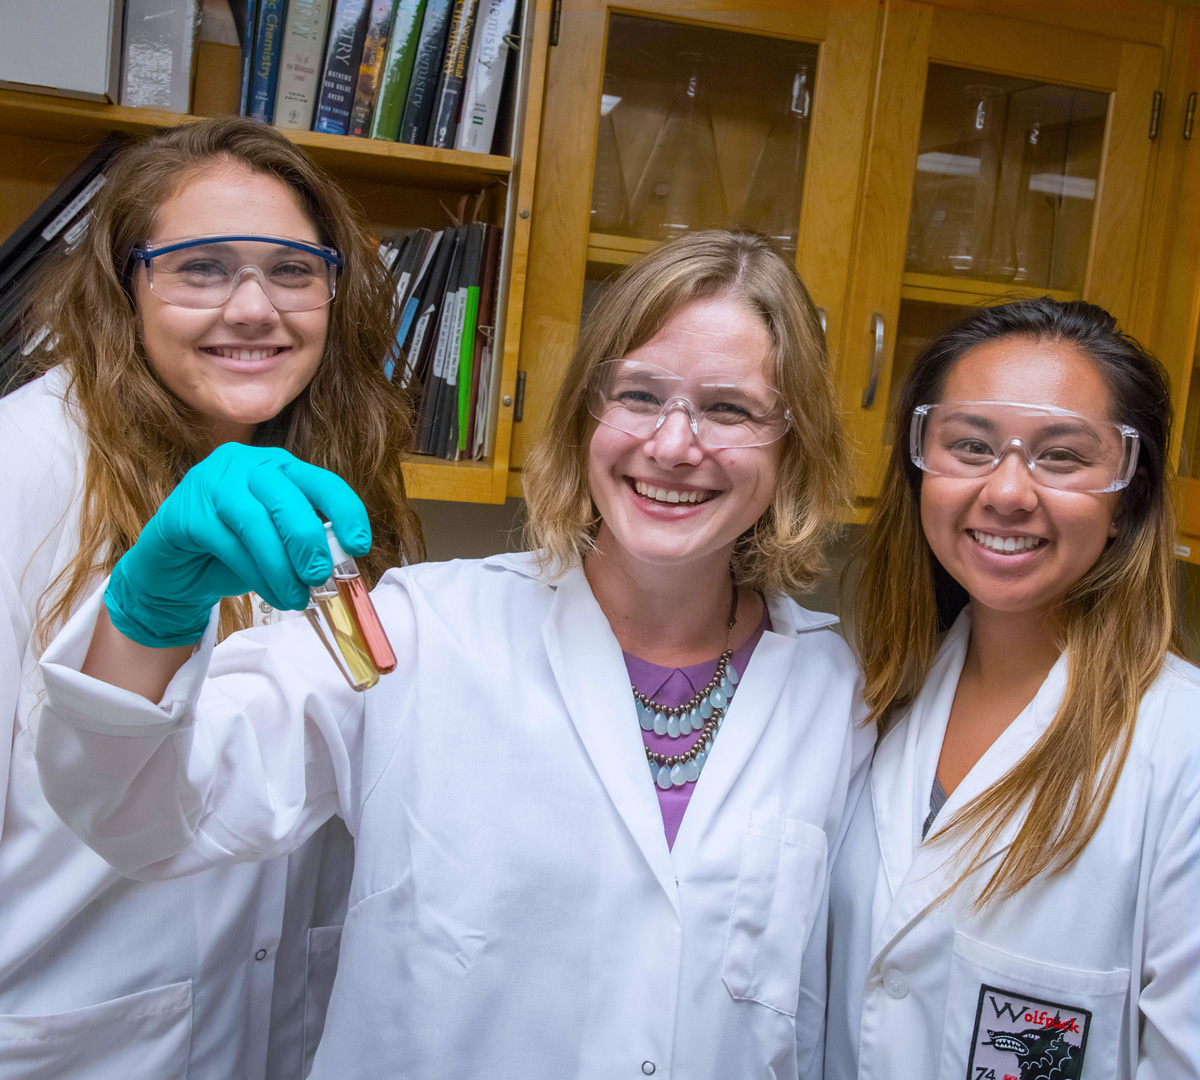 Two smiling female lab students, one holding three test tubes